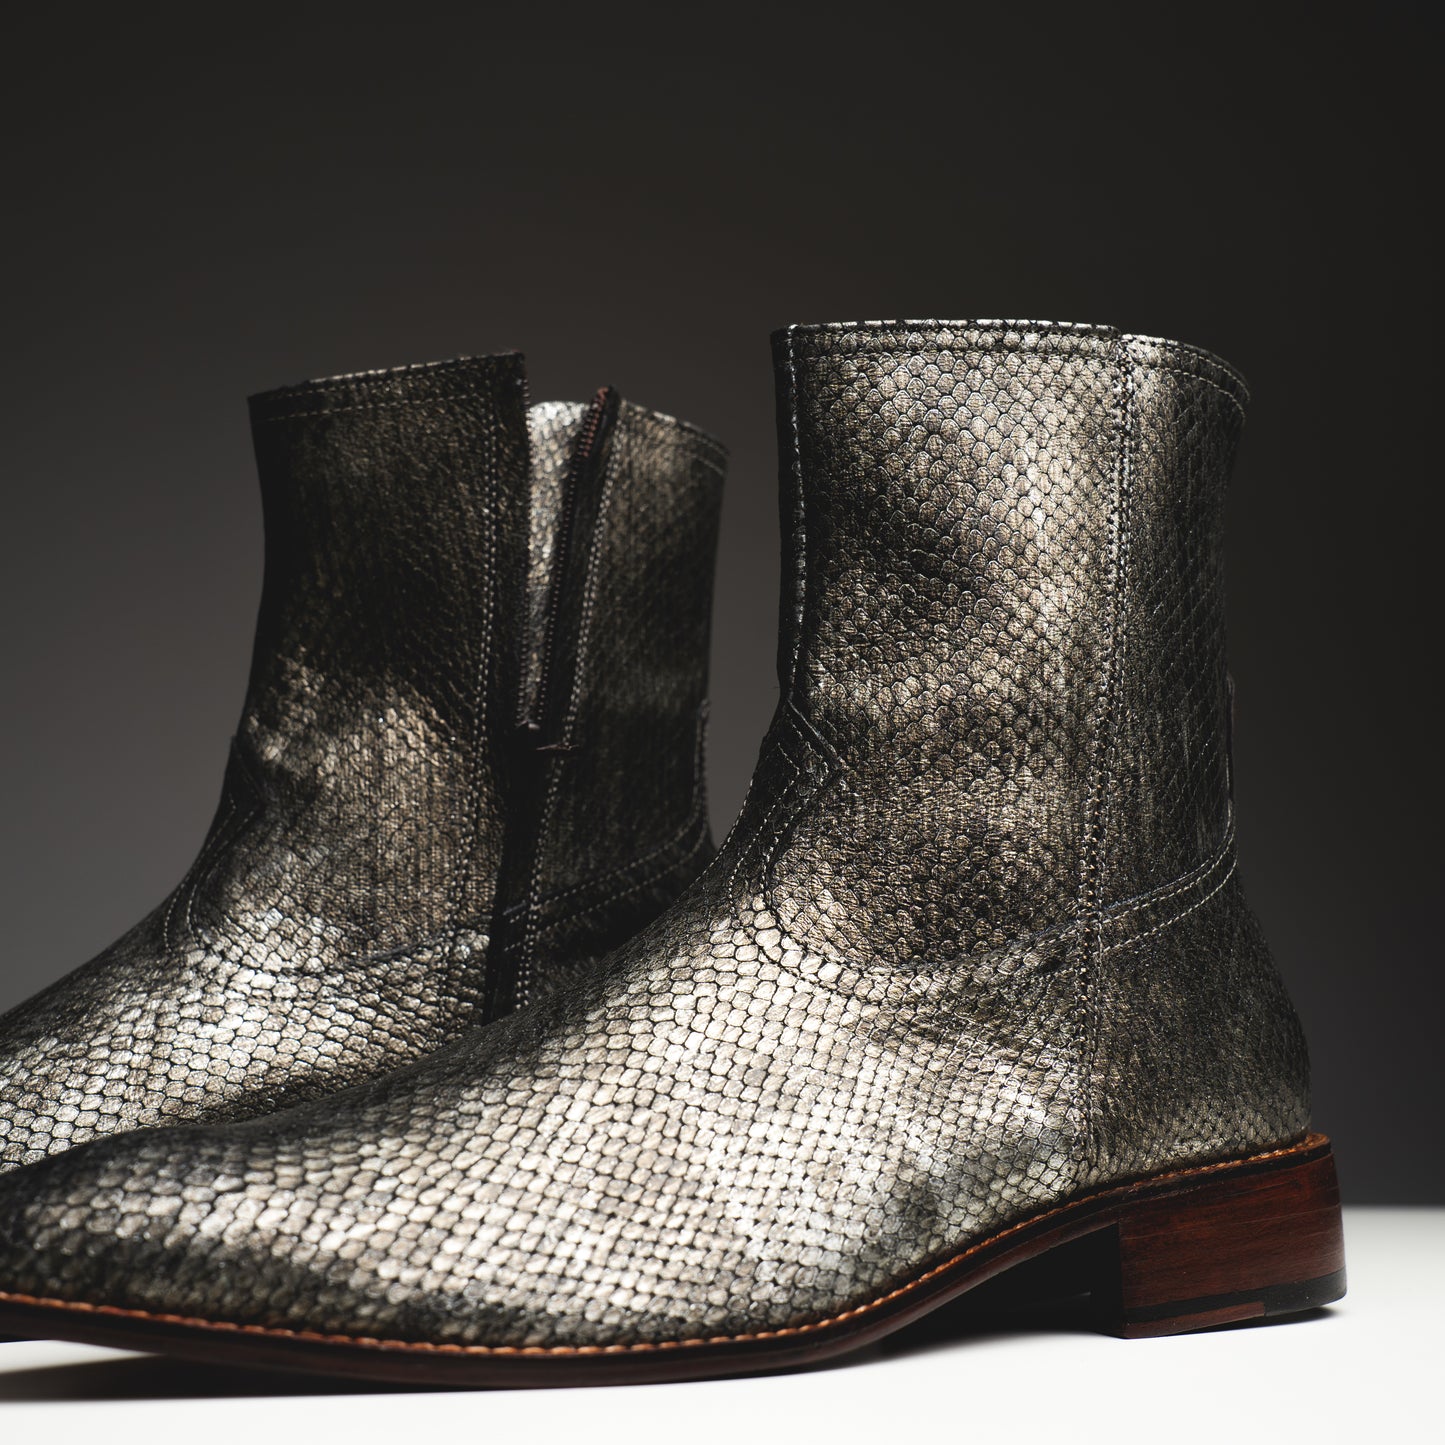 Copper printed python boots